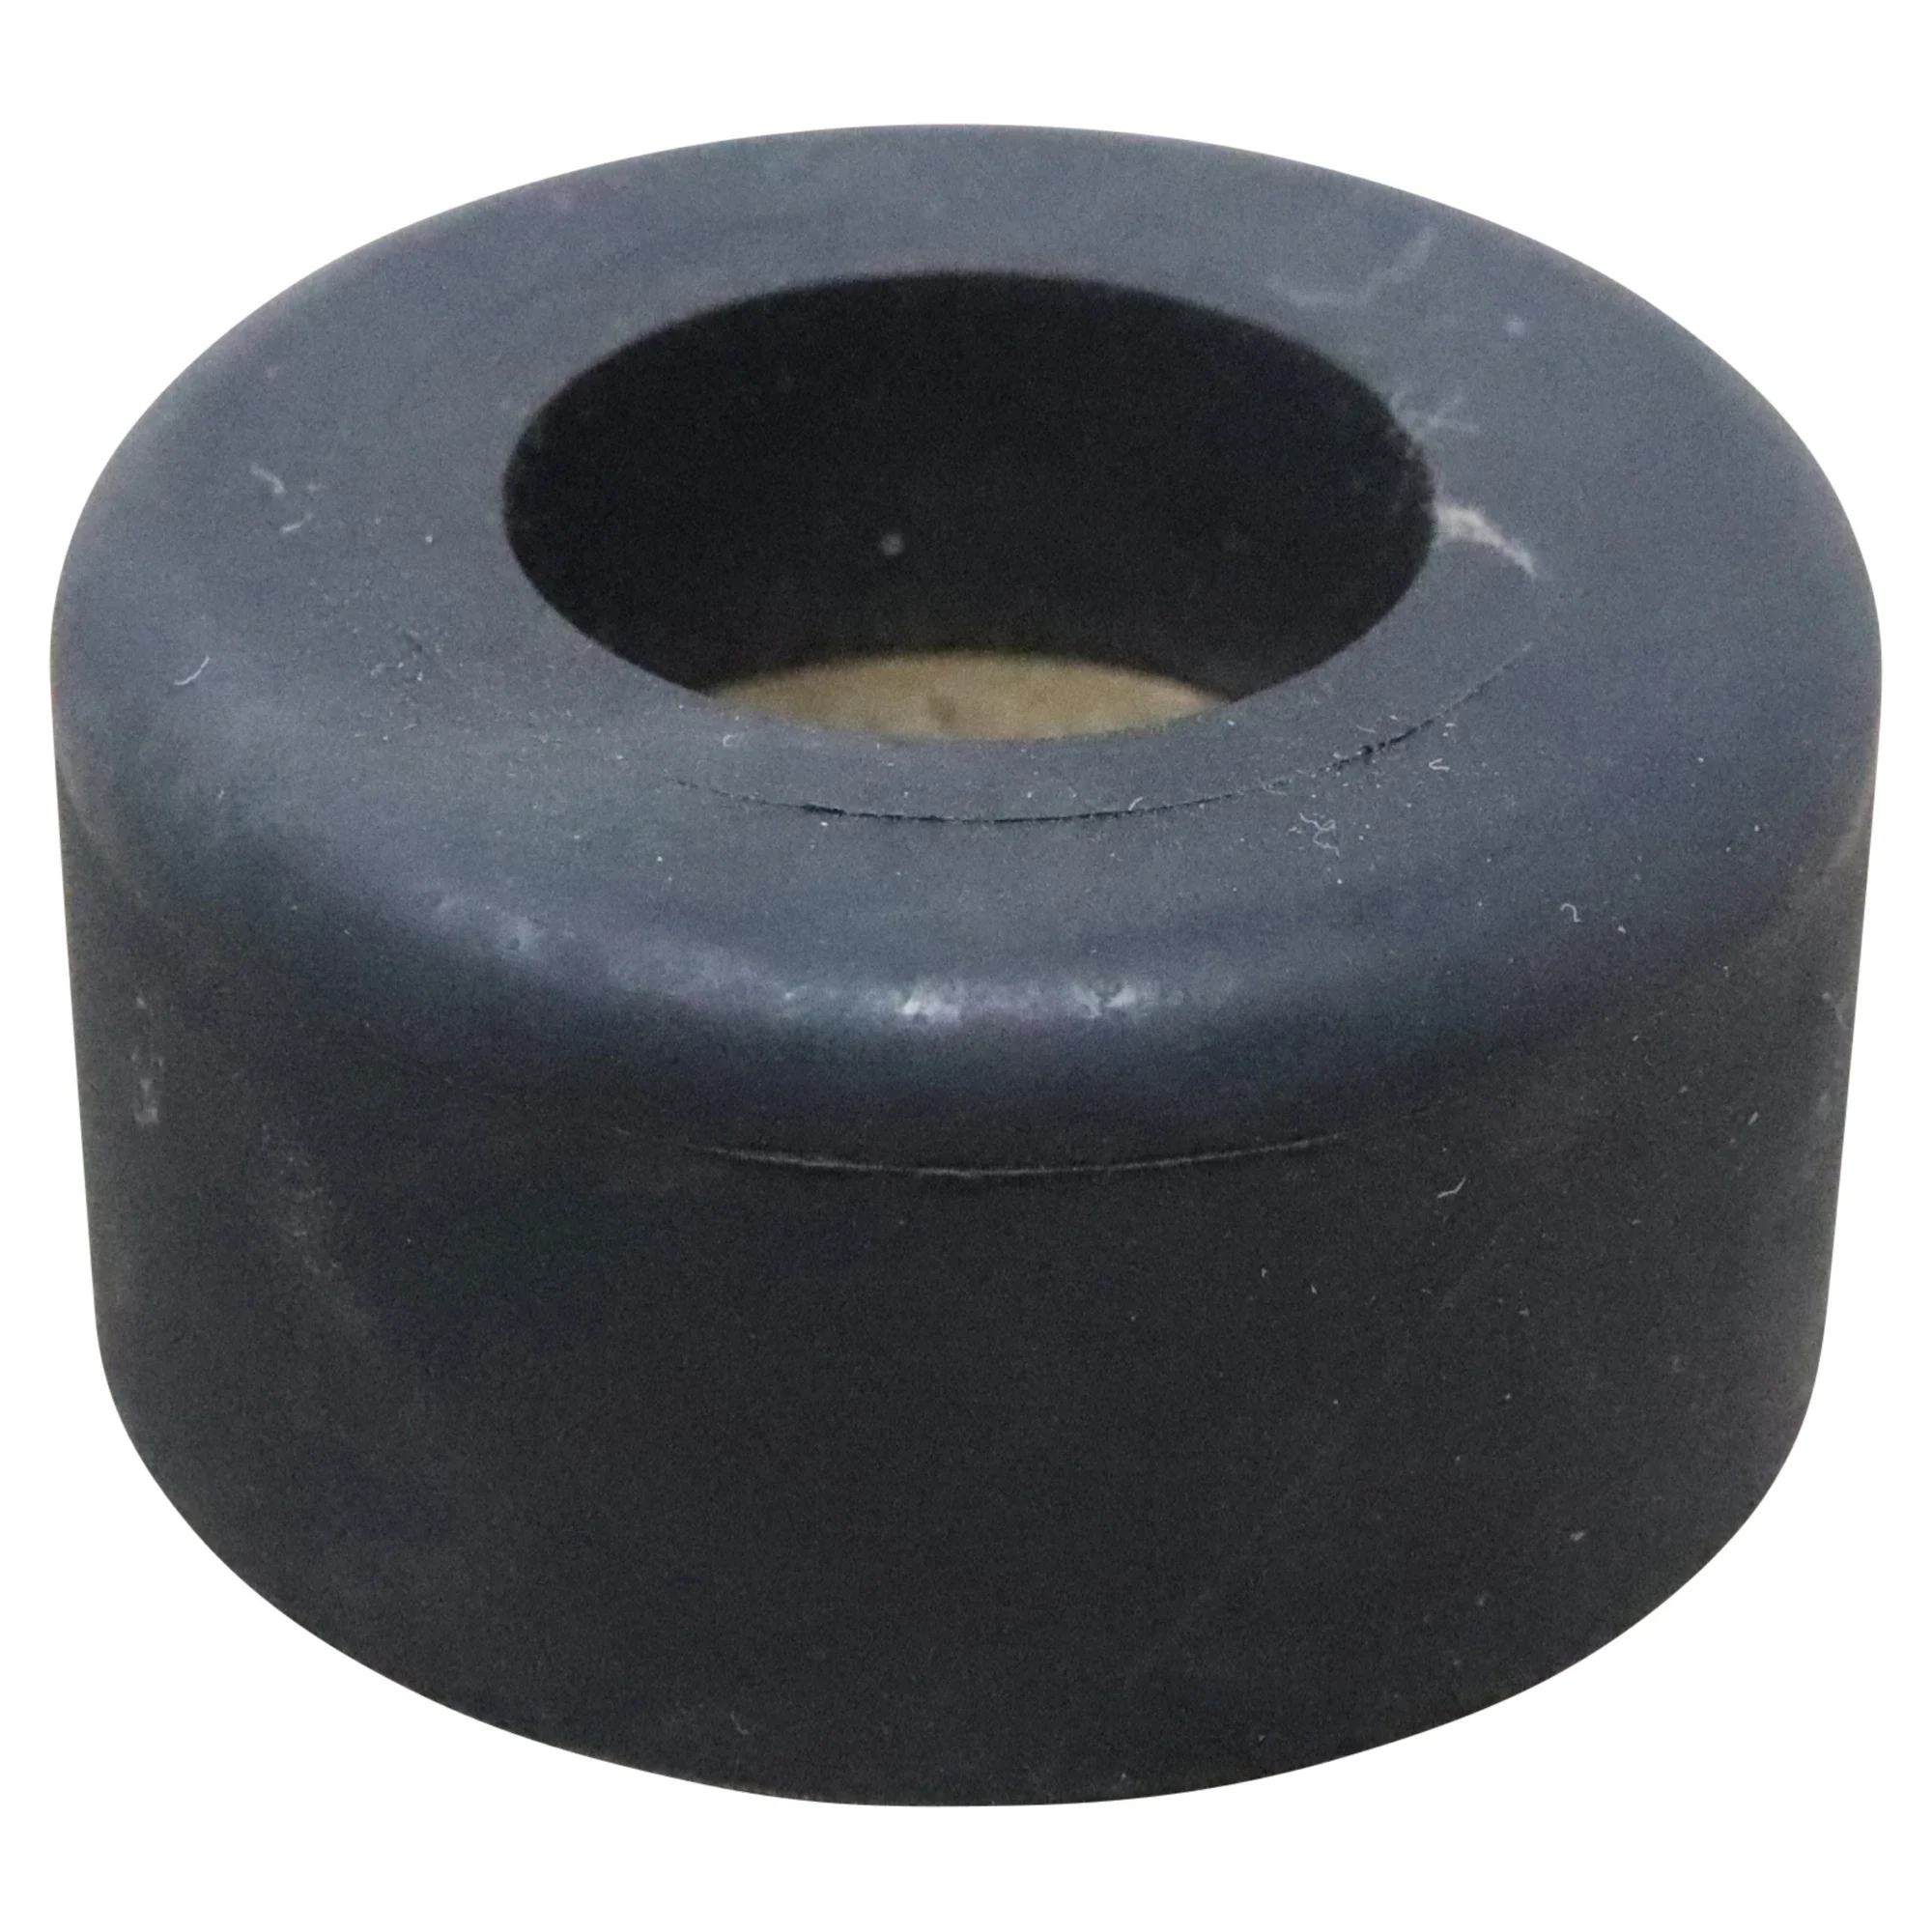 Wastebuilt® Replacement for Labrie 1-1/2" Diameter Rubber Stopper